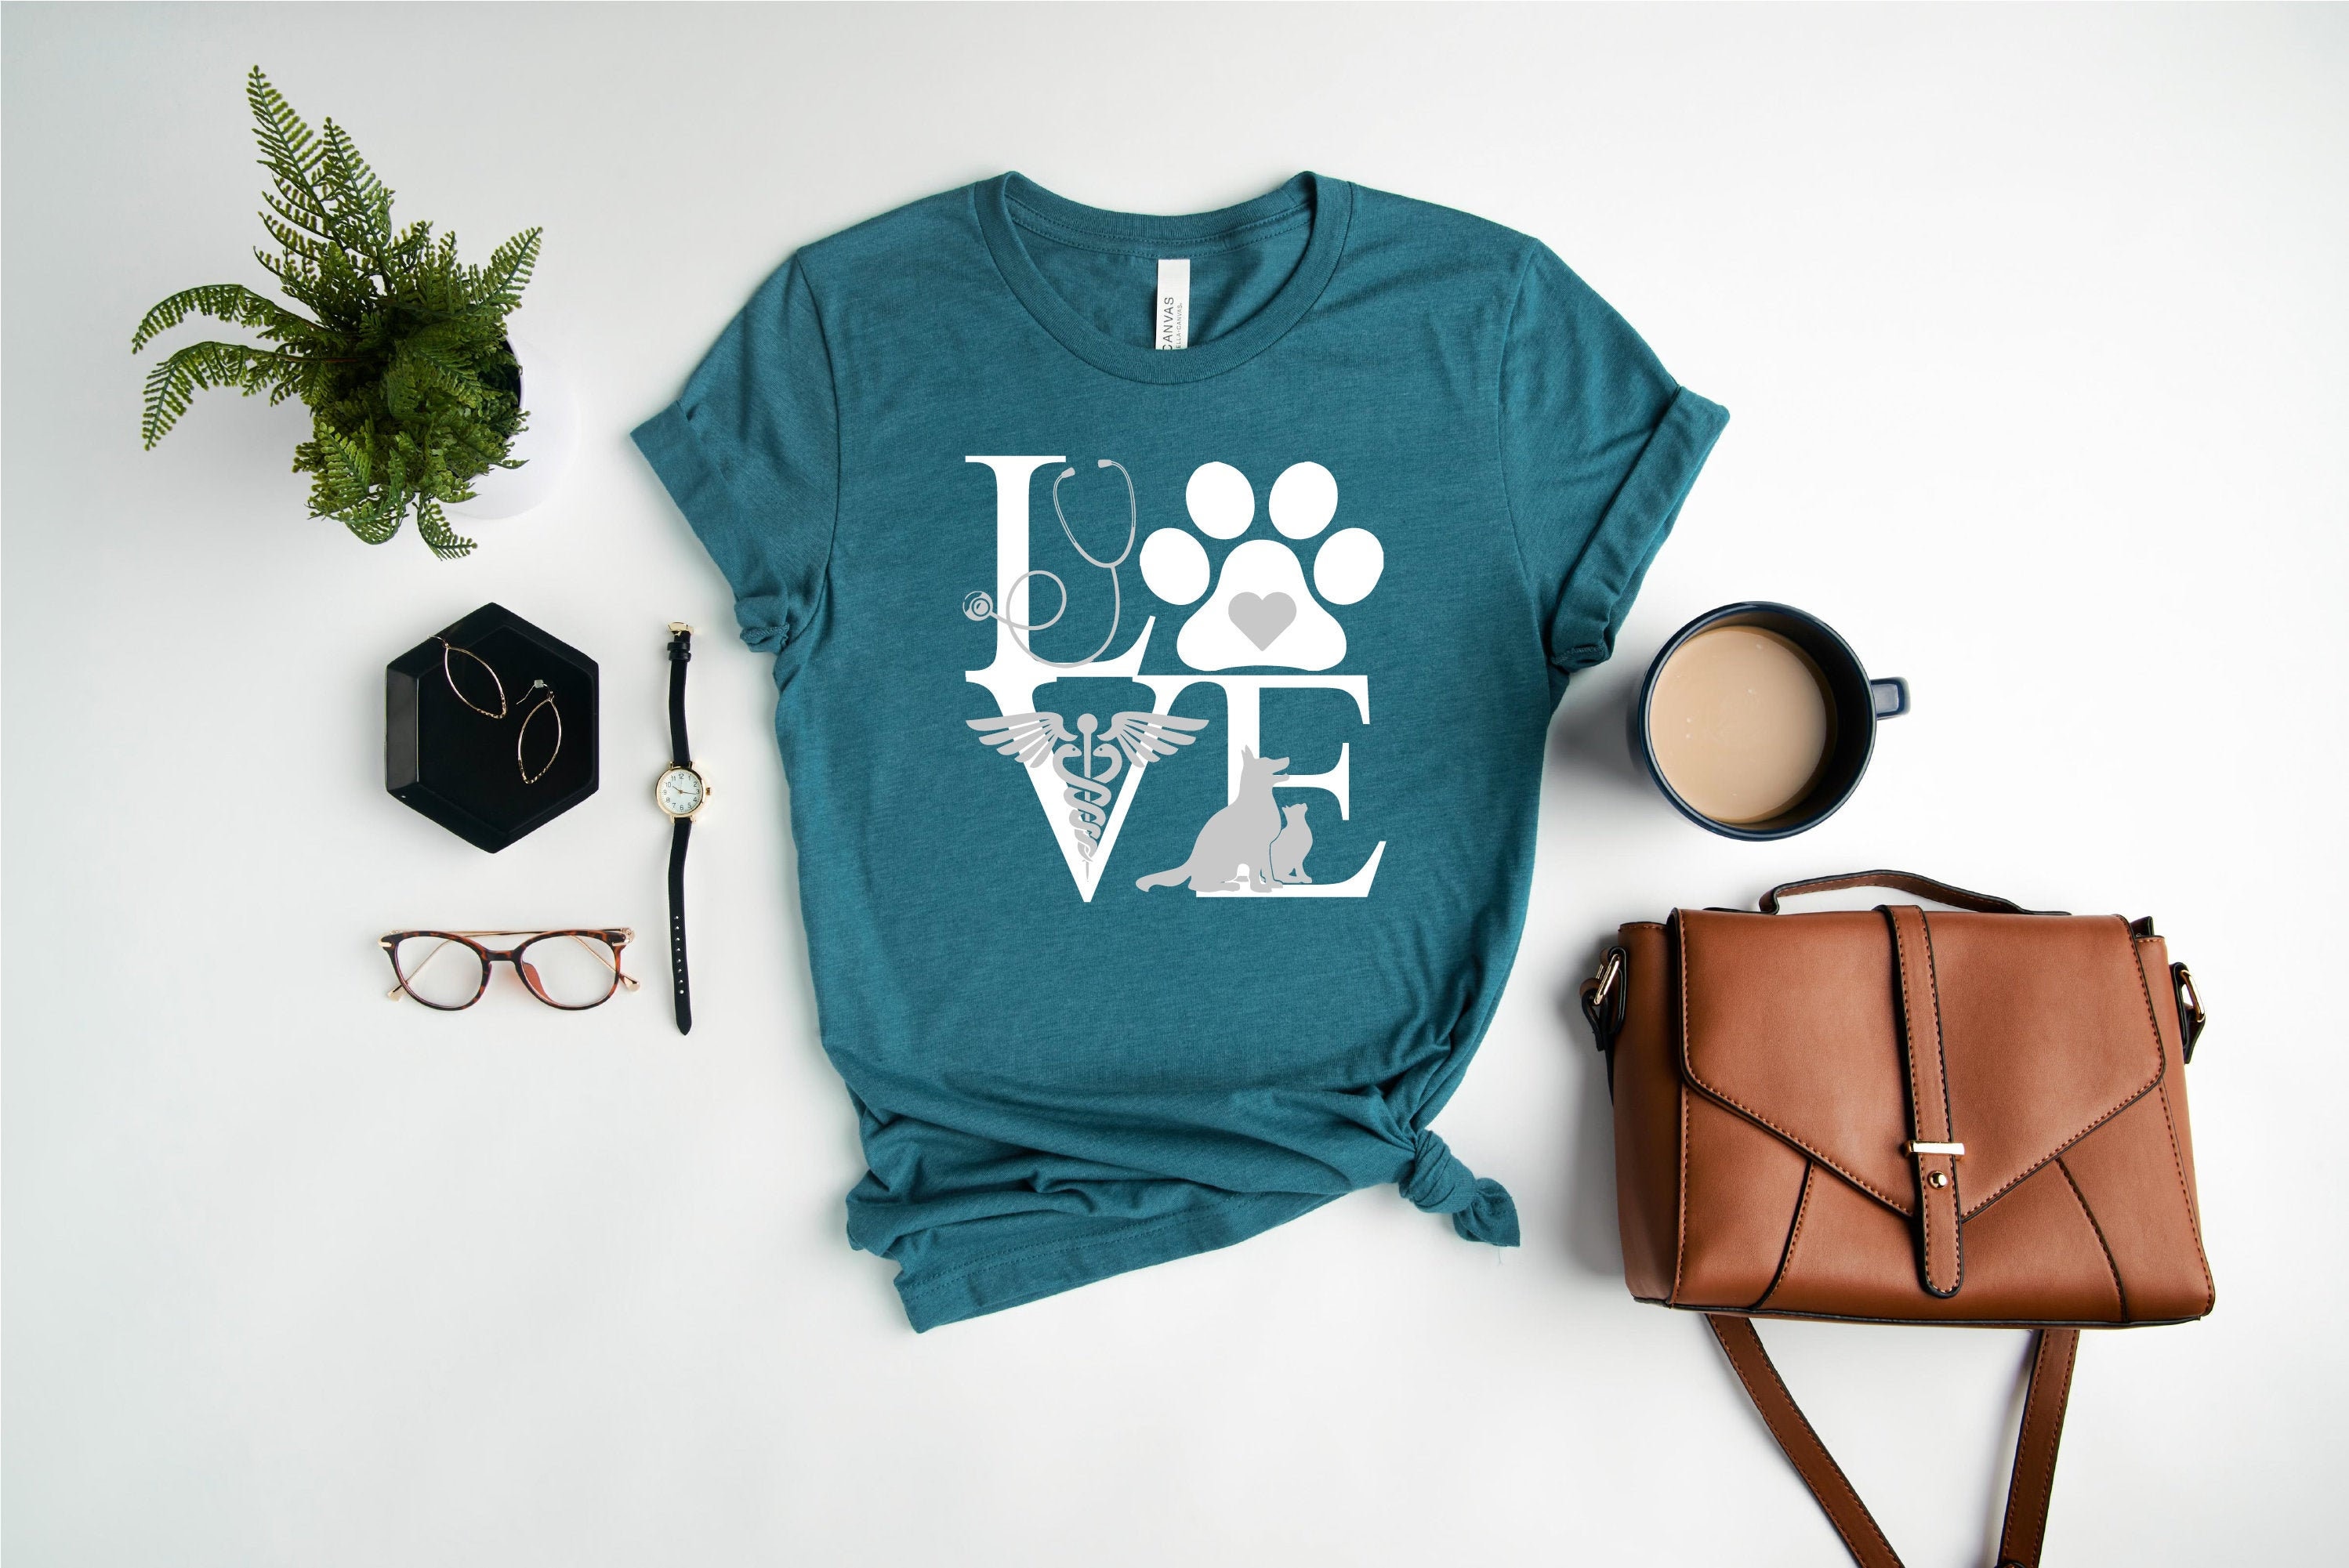 Cute Statement Shirt for the Dog Doctor